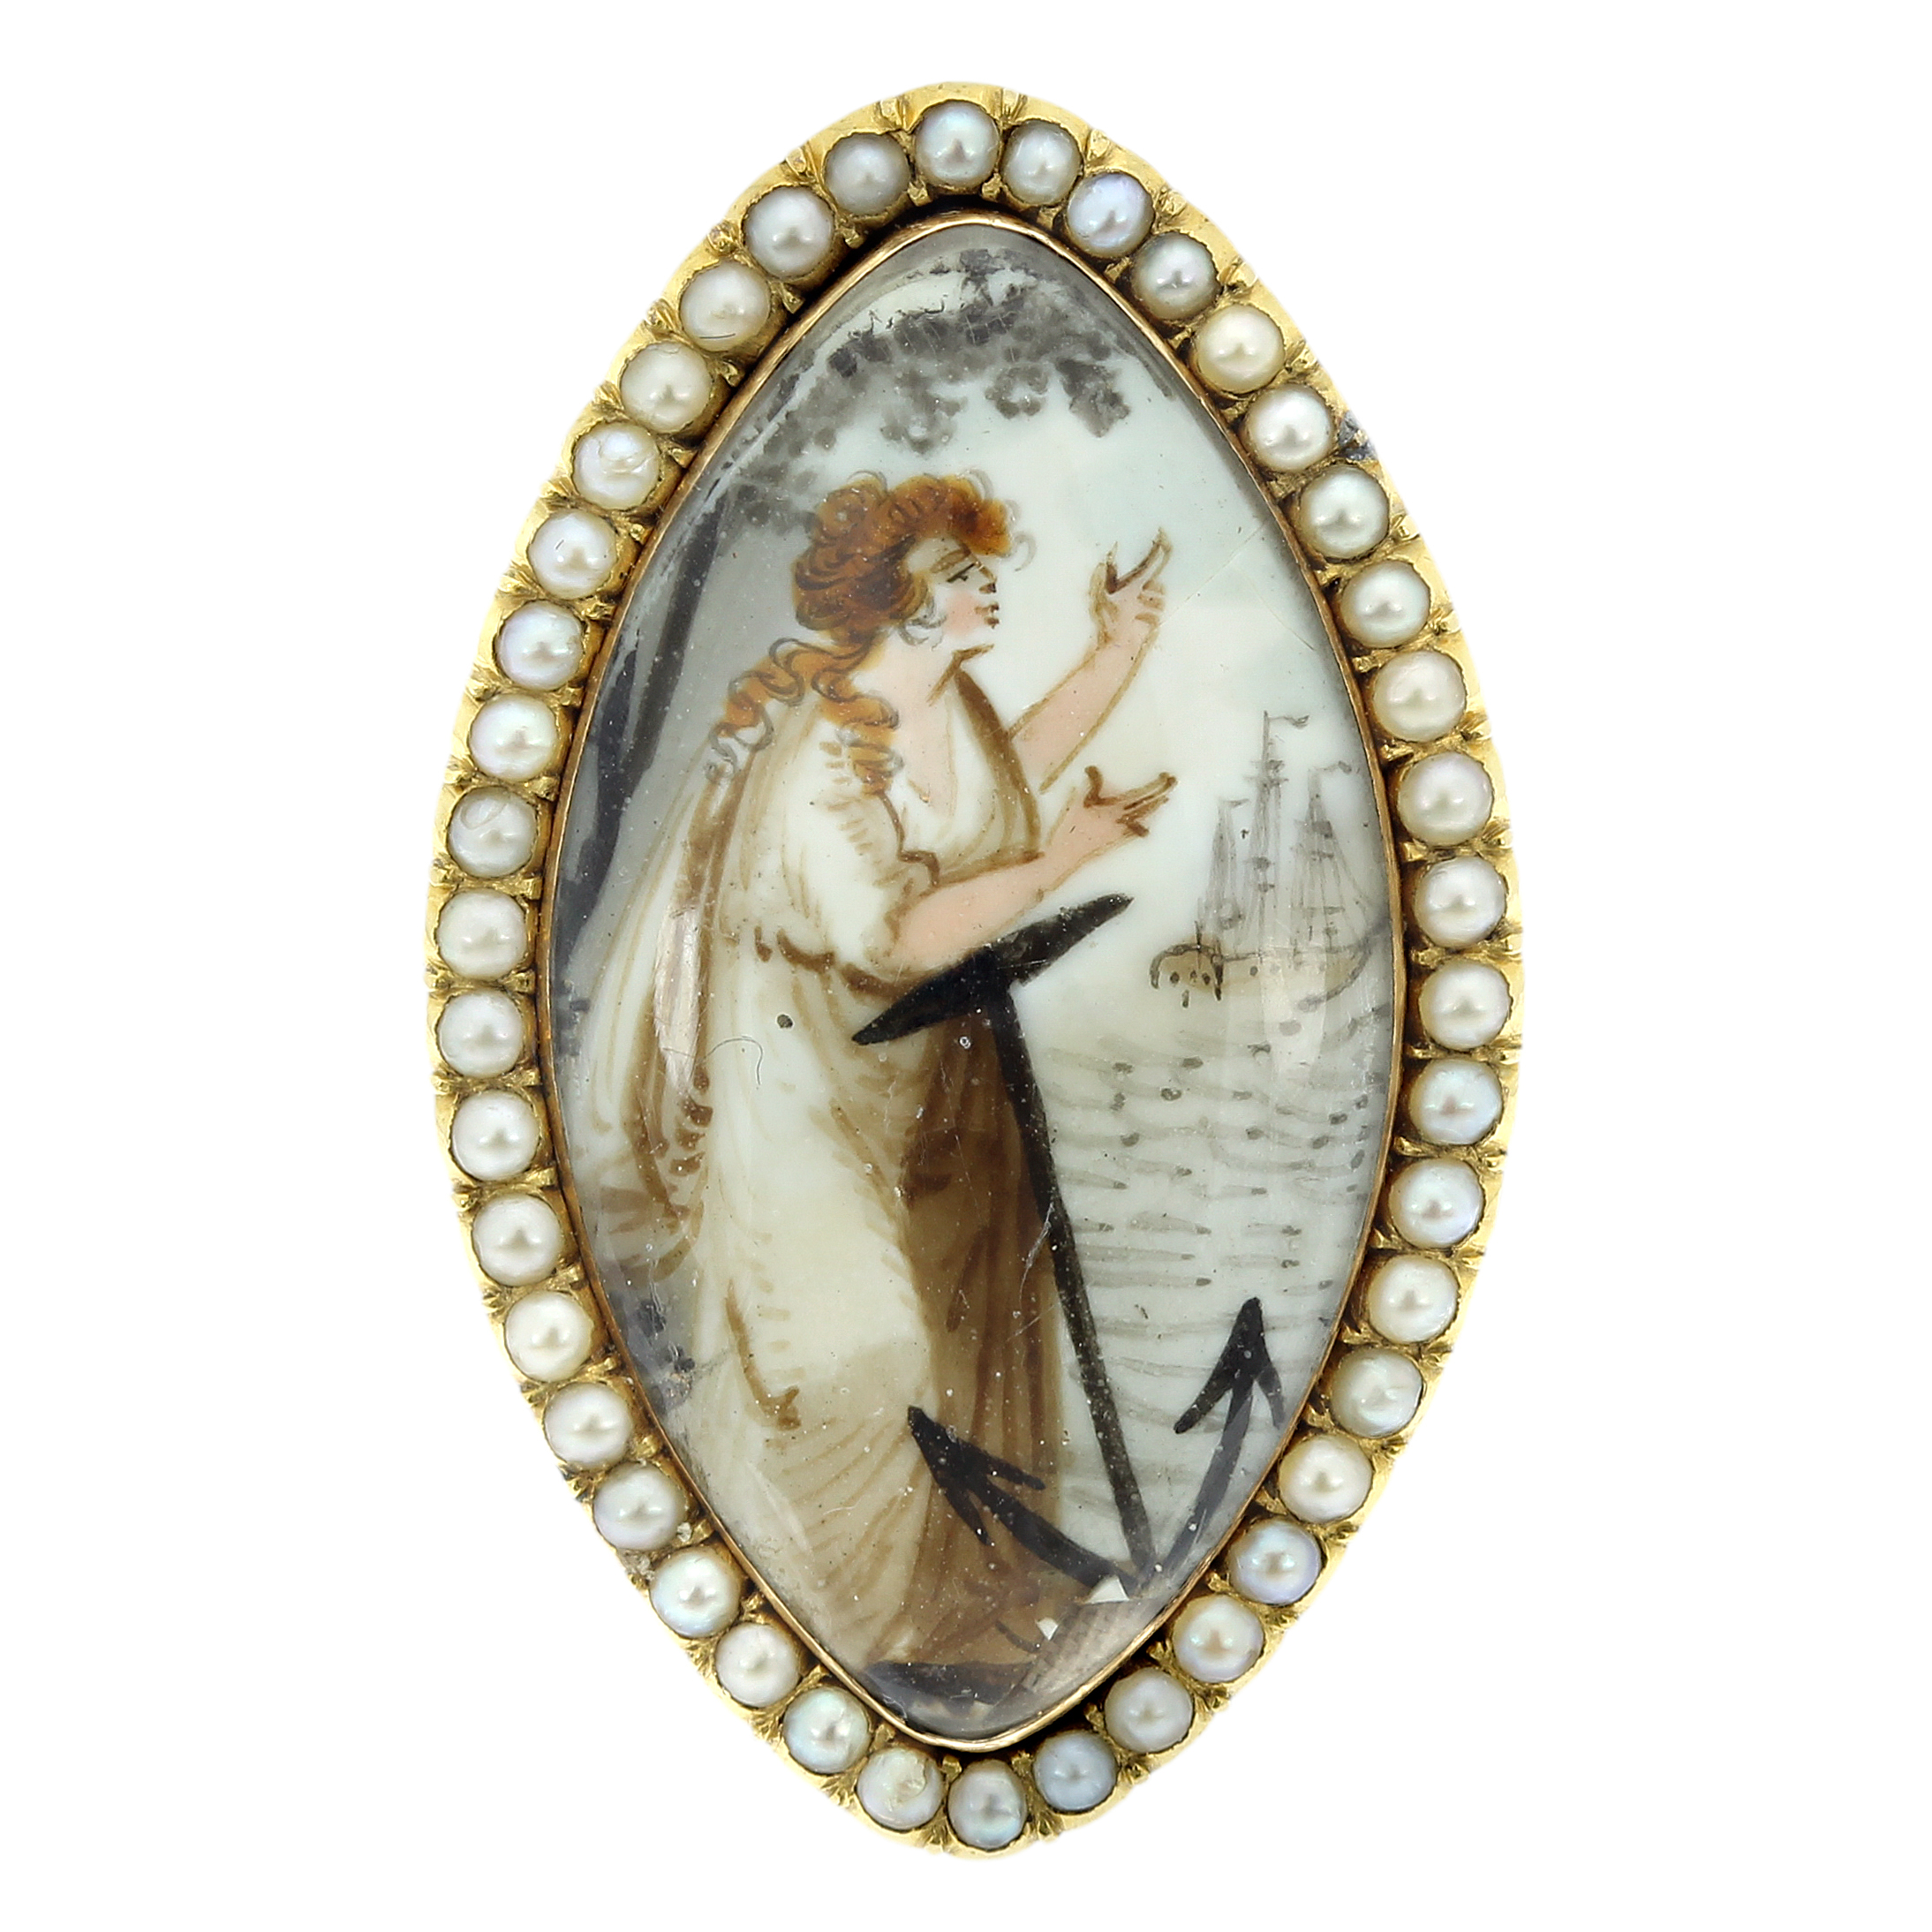 AN ANTIQUE PORTRAIT MINIATURE AND SEED PEARL BROOCH CIRCA 1830 in high carat yellow gold, of navette